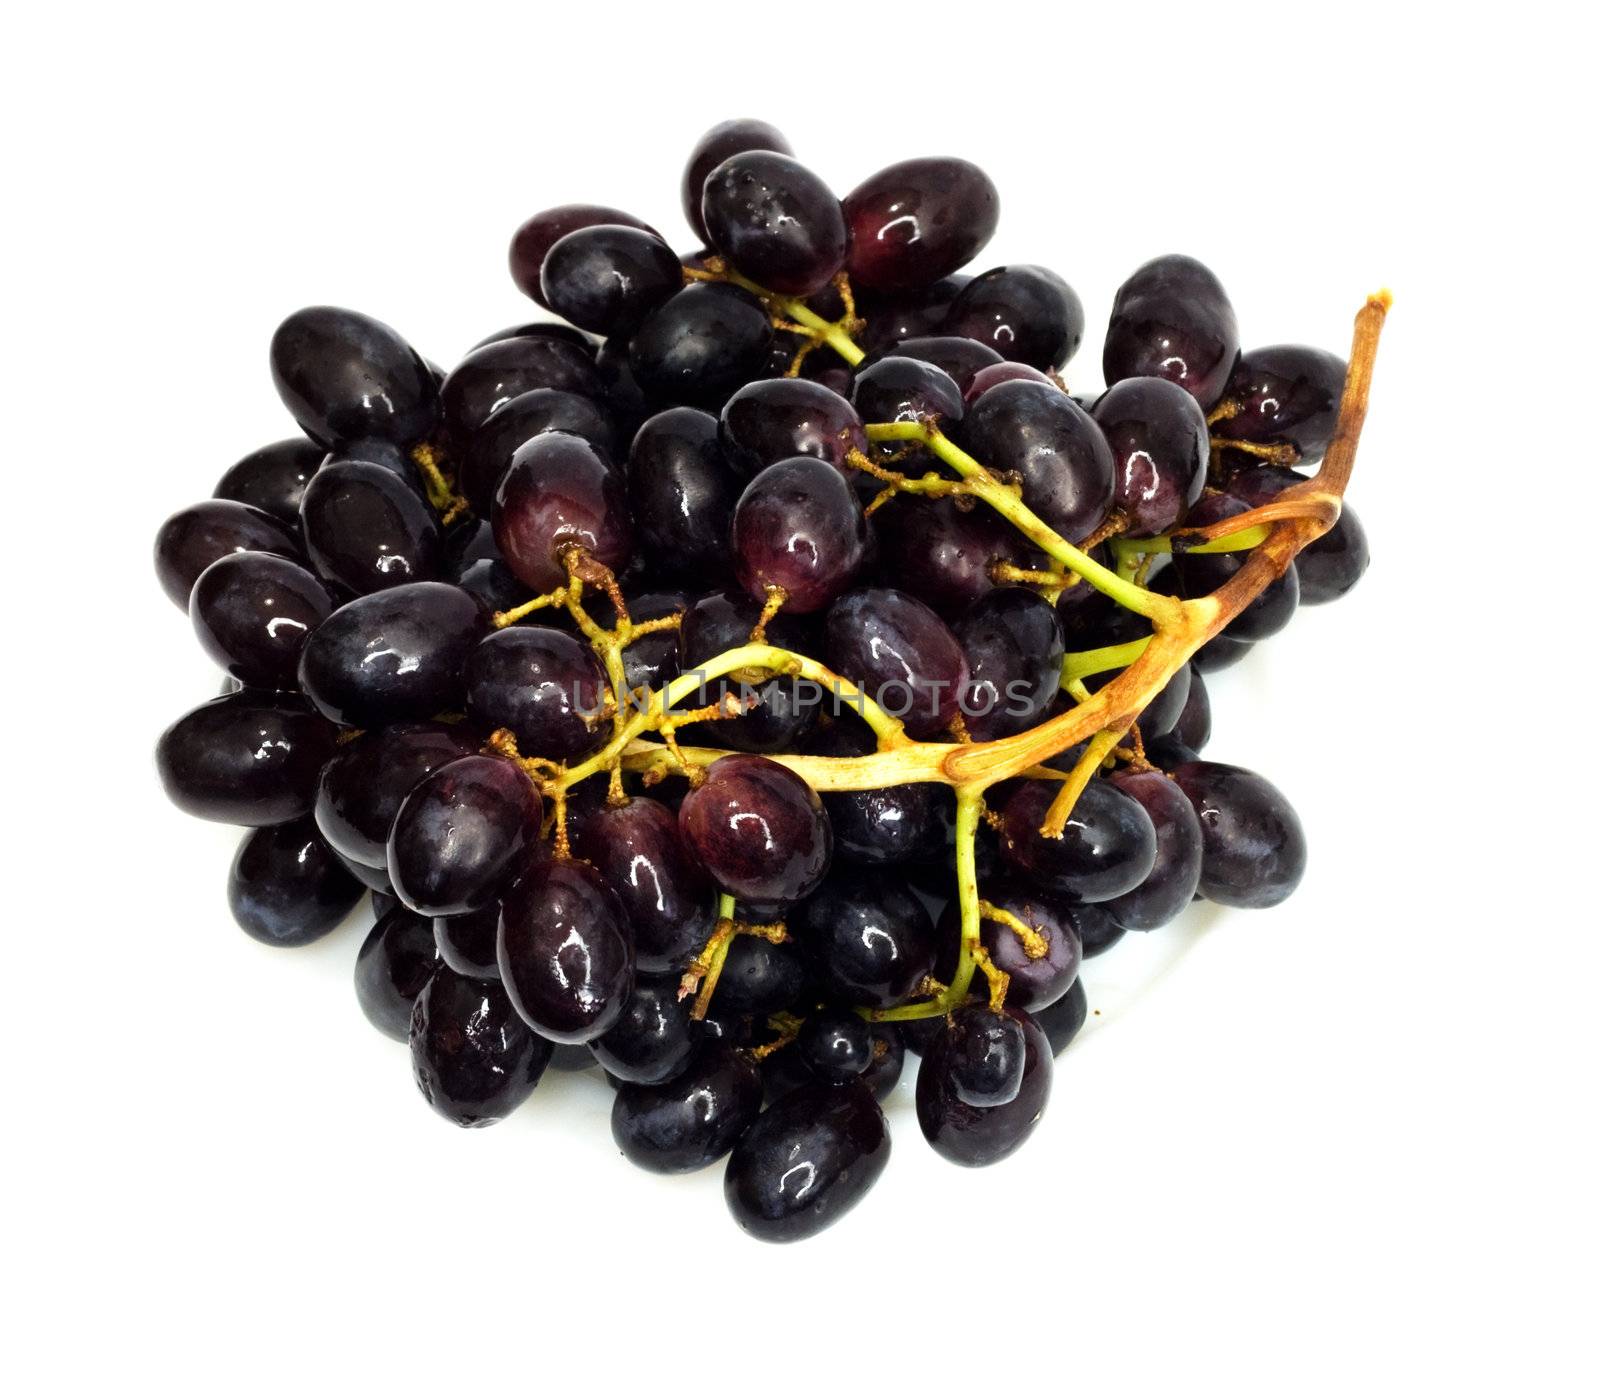 Bunch of black grapes isolated on white background  by schankz